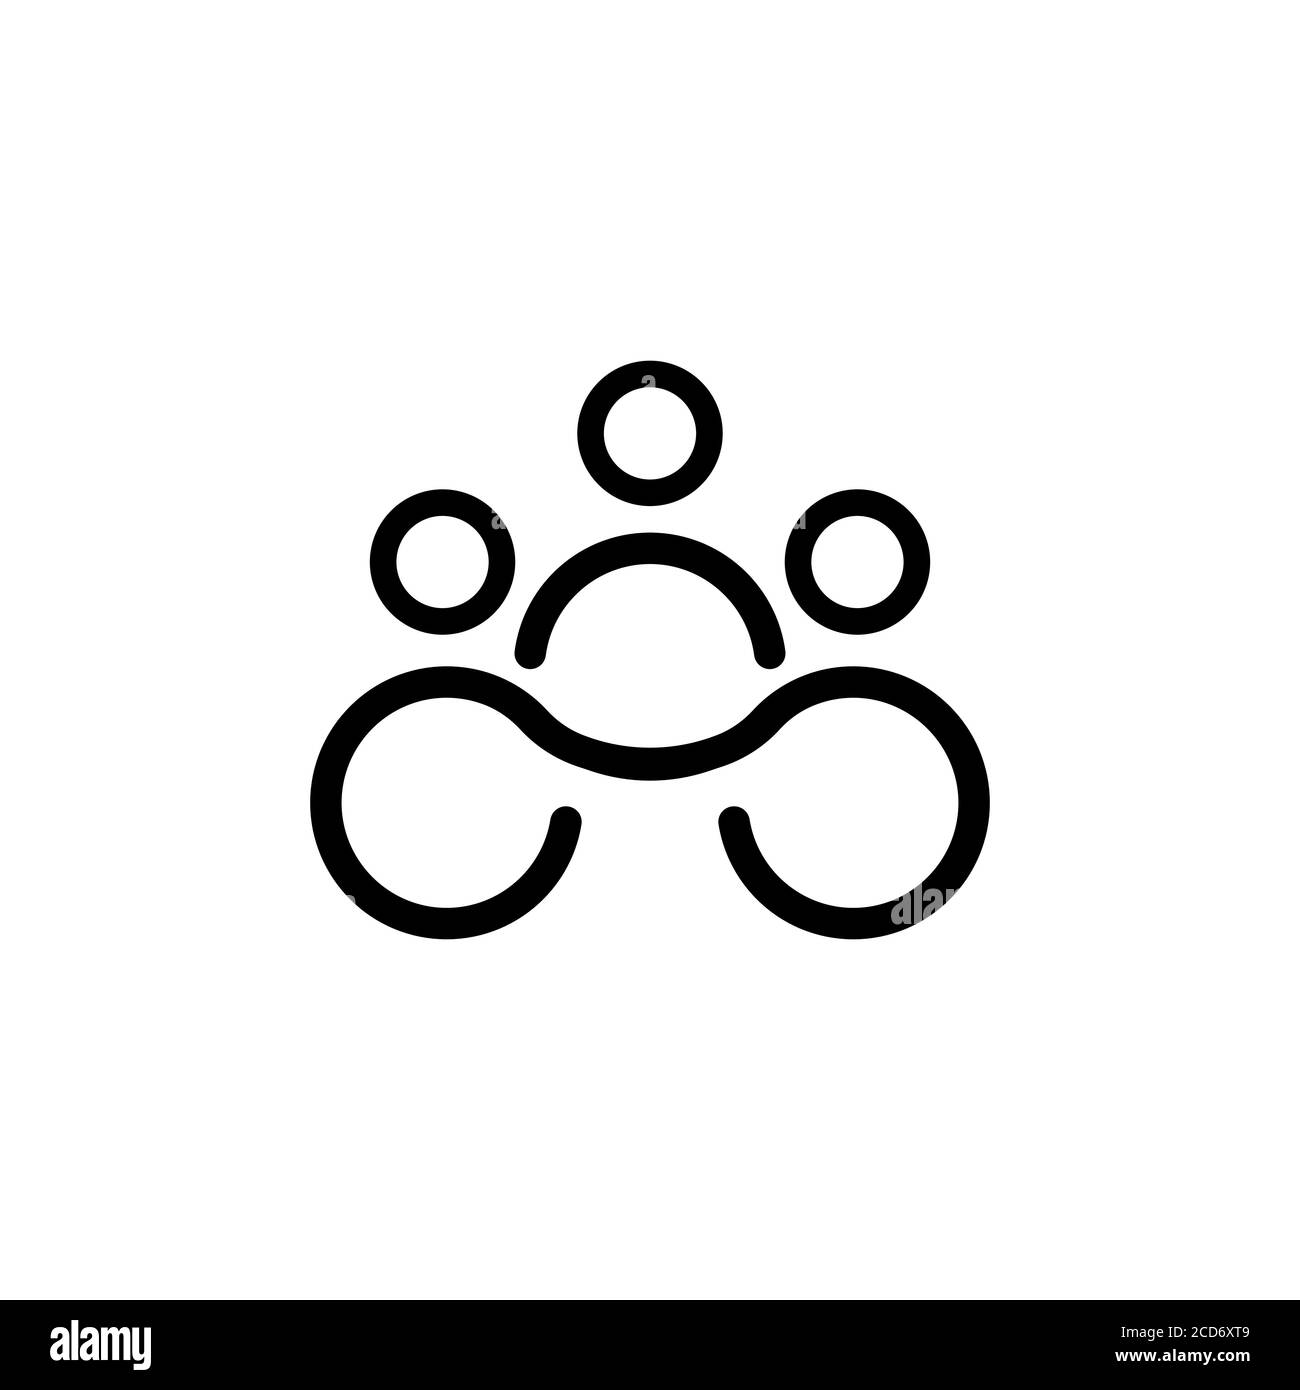 Black And White SCP Logo Design, A? 10 Supported. Royalty Free SVG,  Cliparts, Vectors, and Stock Illustration. Image 63537212.